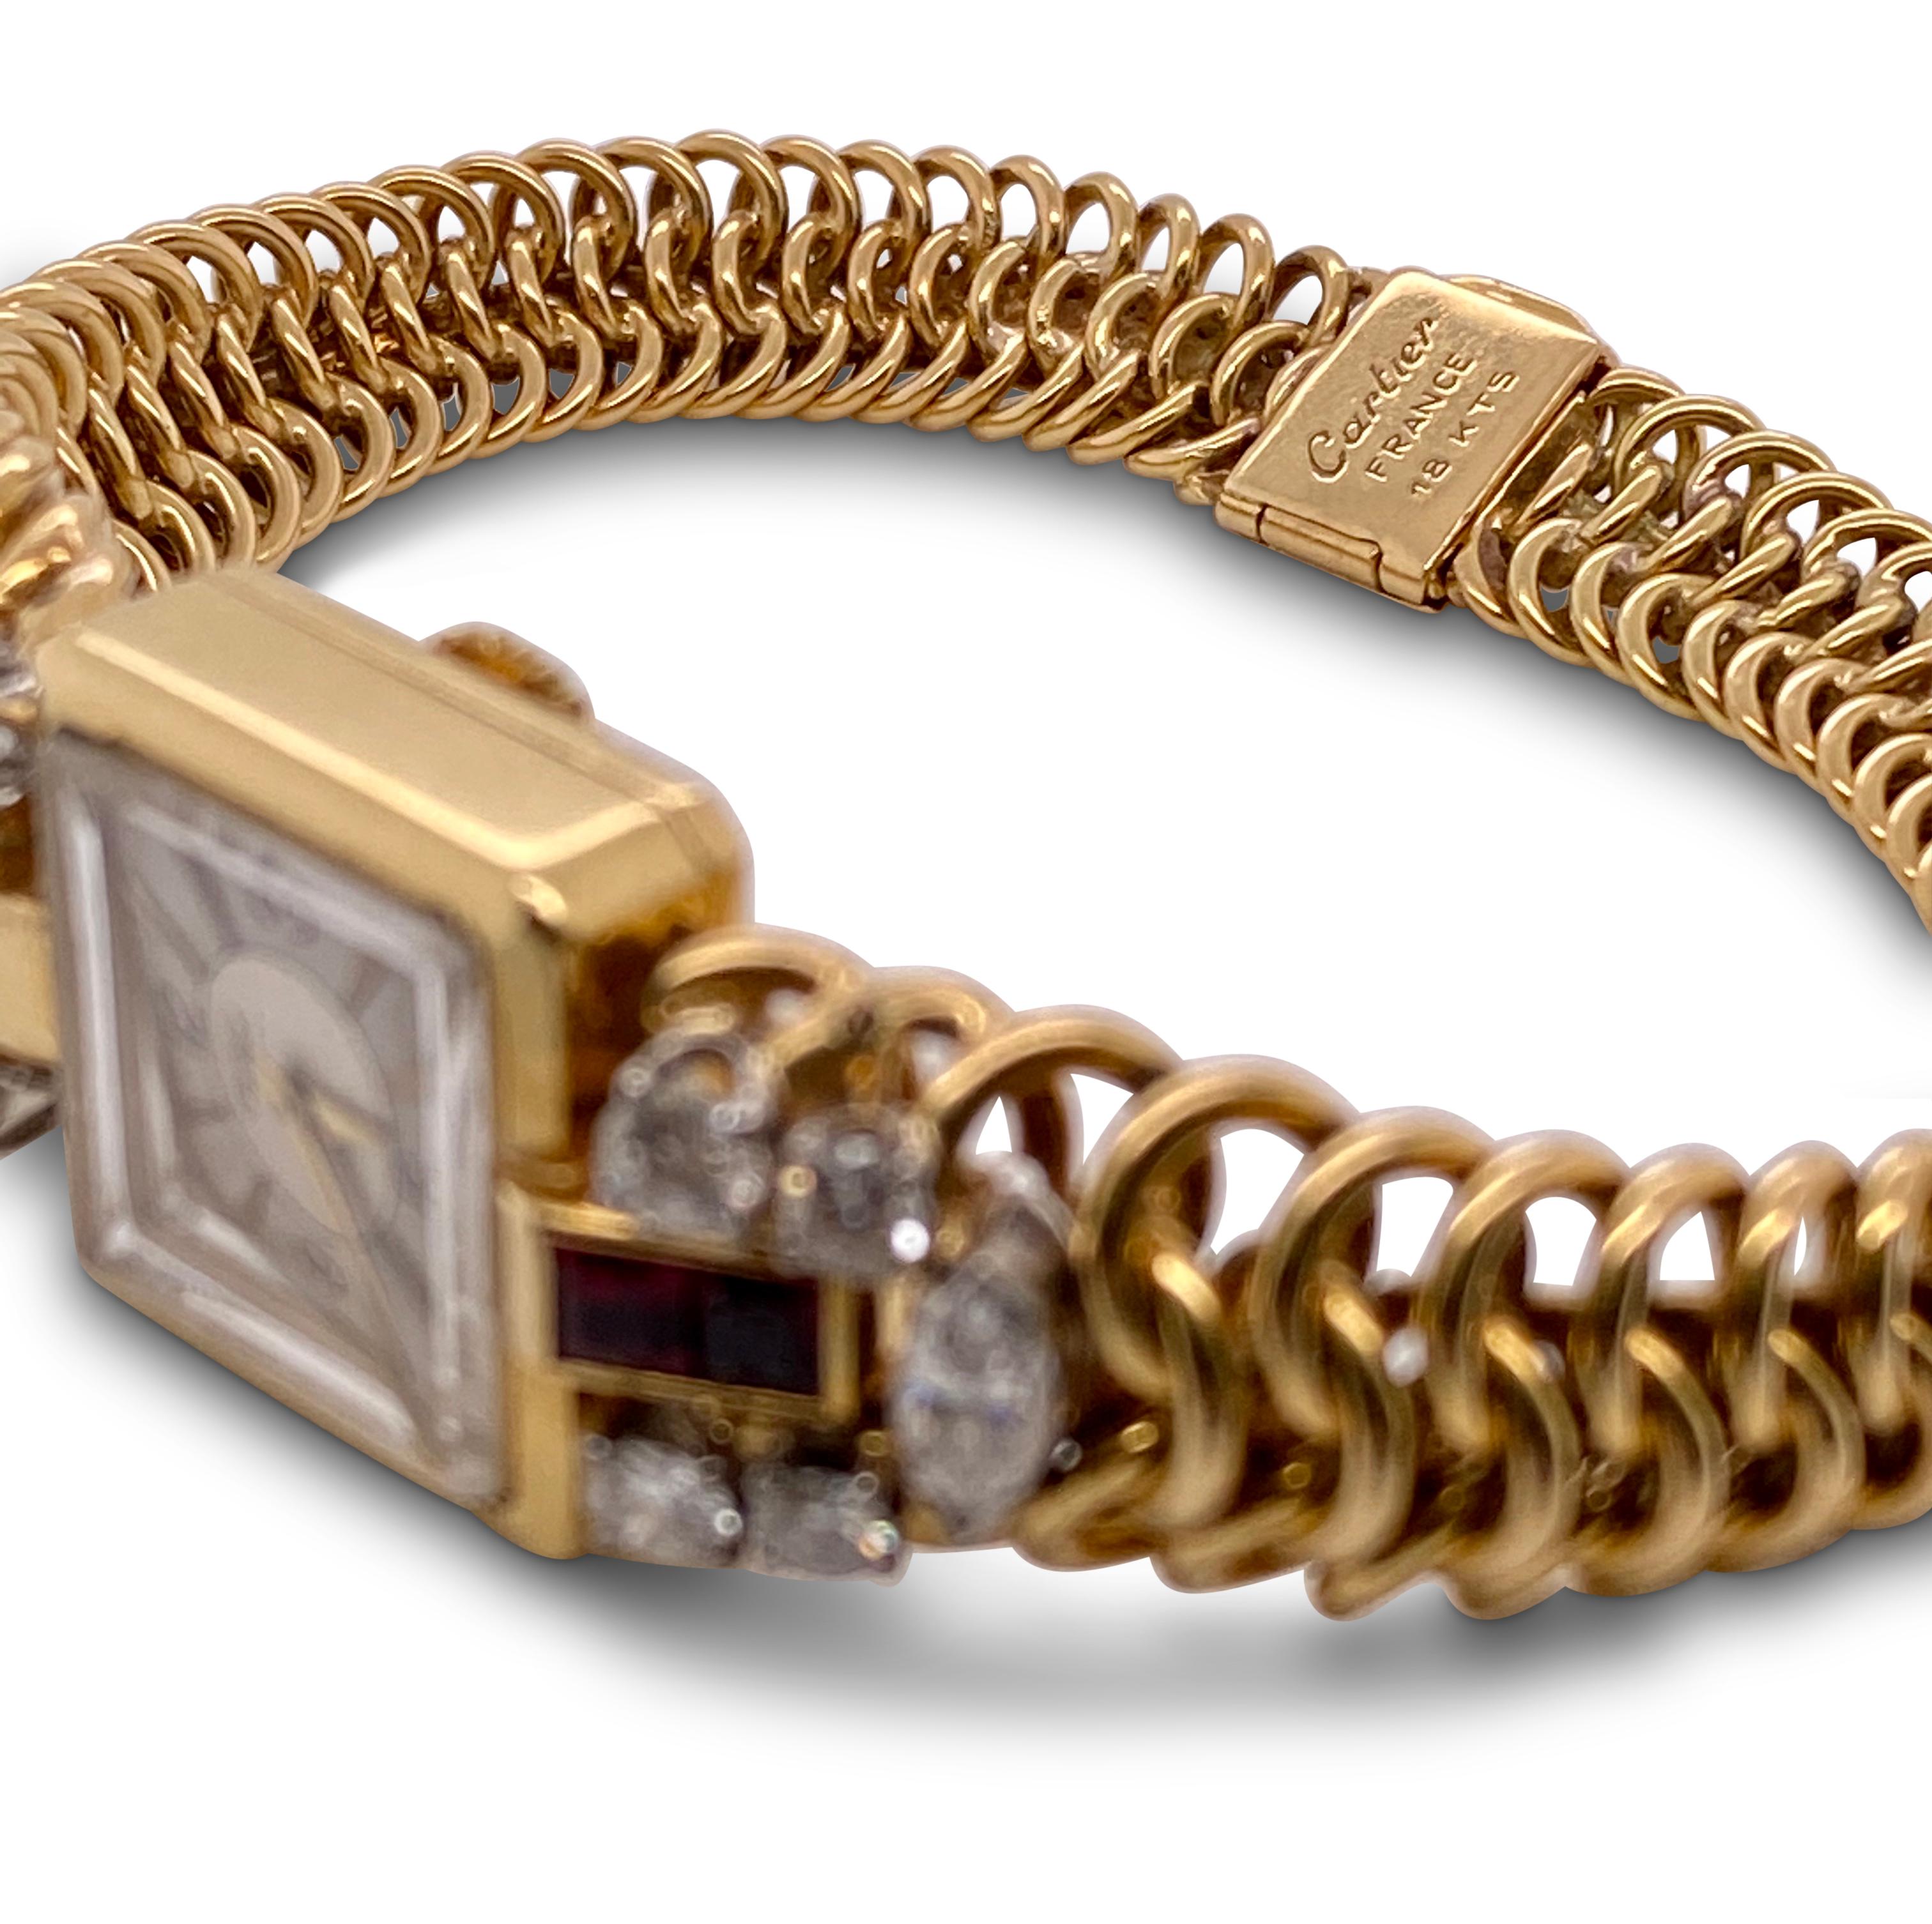 Retro Cartier ladies dress watch with an elegant woven bracelet crafted in 18 karat yellow gold. The watch is adorned with four calibre cut rubies as well as marquise and round cut diamonds weighing an estimated 1.30 carats total (H-I color, SI